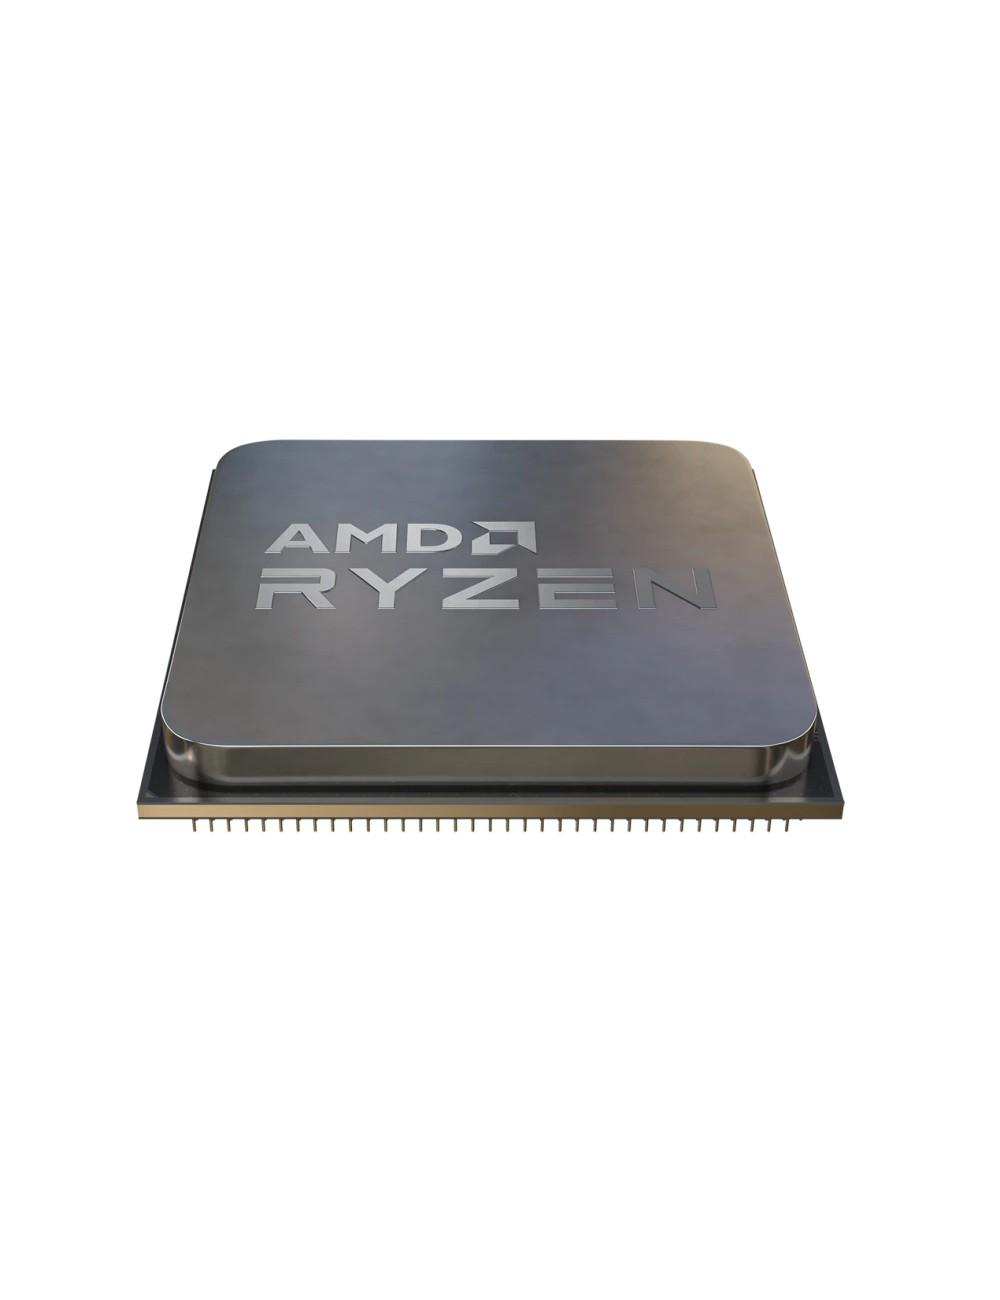 Selected image for AMD Procesor Ryzen 5 4500 6C/12T/3.6GHz/11MB/65W/AM4/BOX